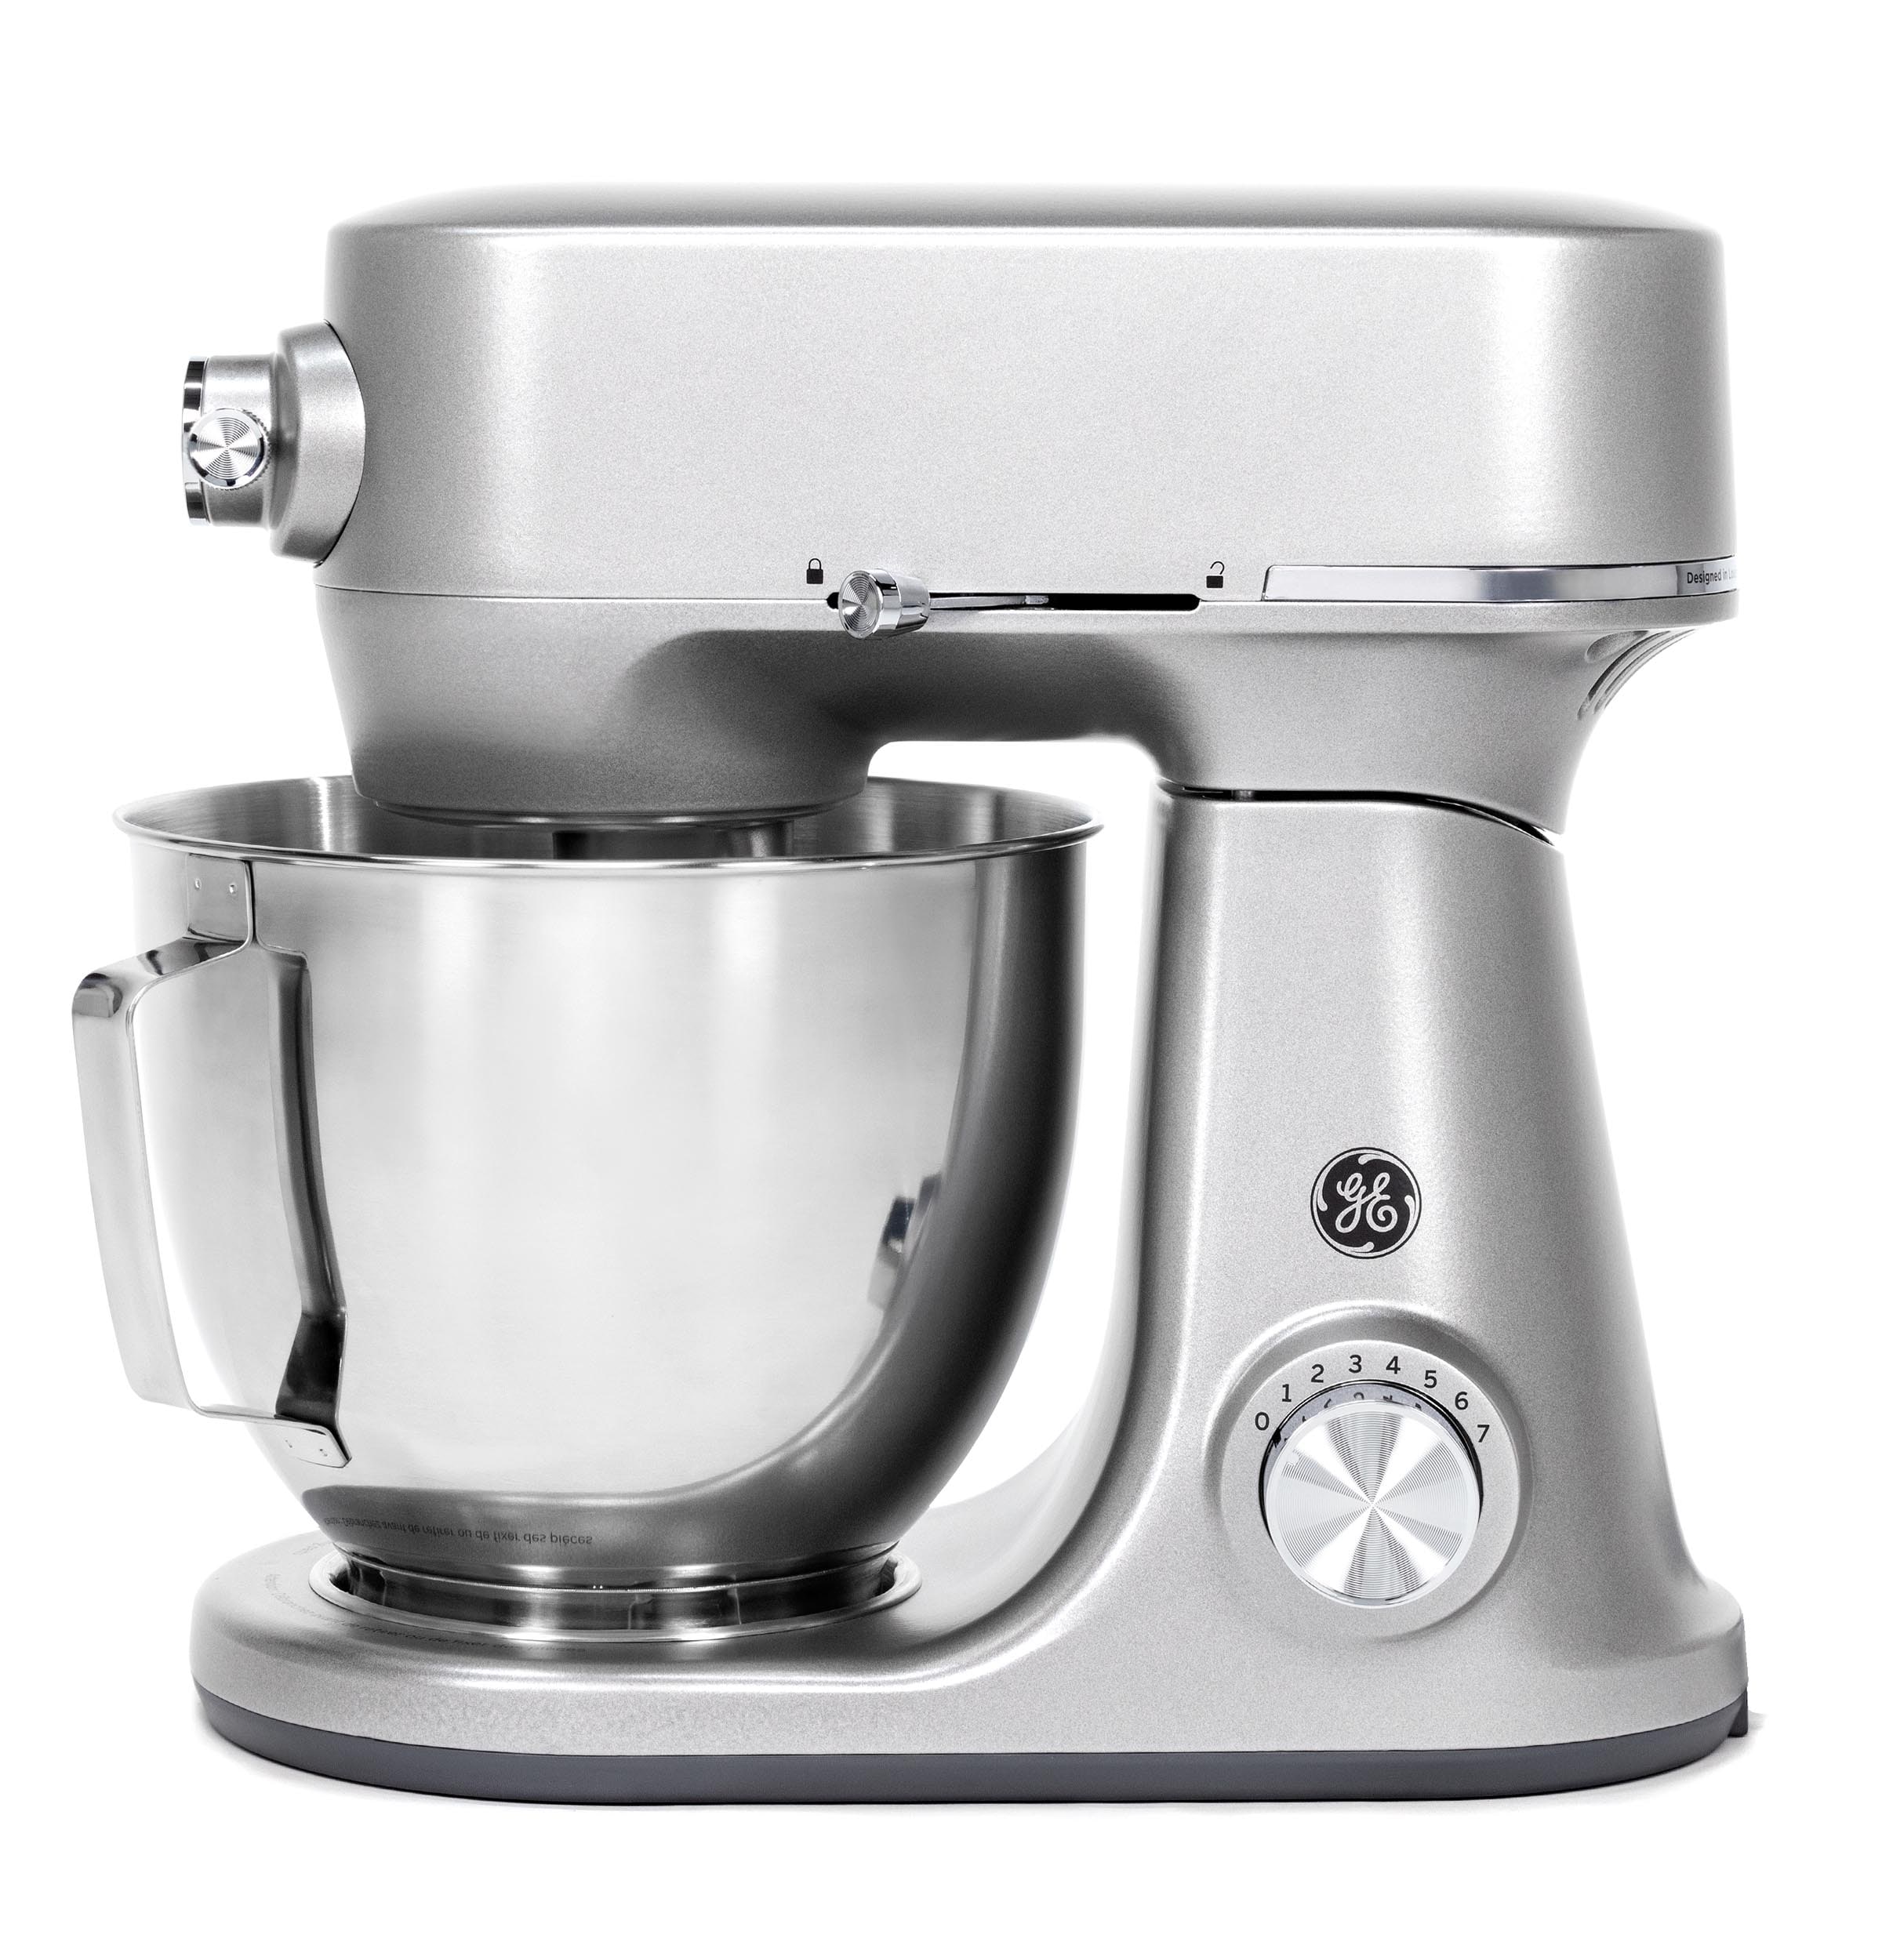 KitchenAid Classic Series Stand Mixer 4.5 Q and Bread Bowl with Baking Lid,  Onyx Black